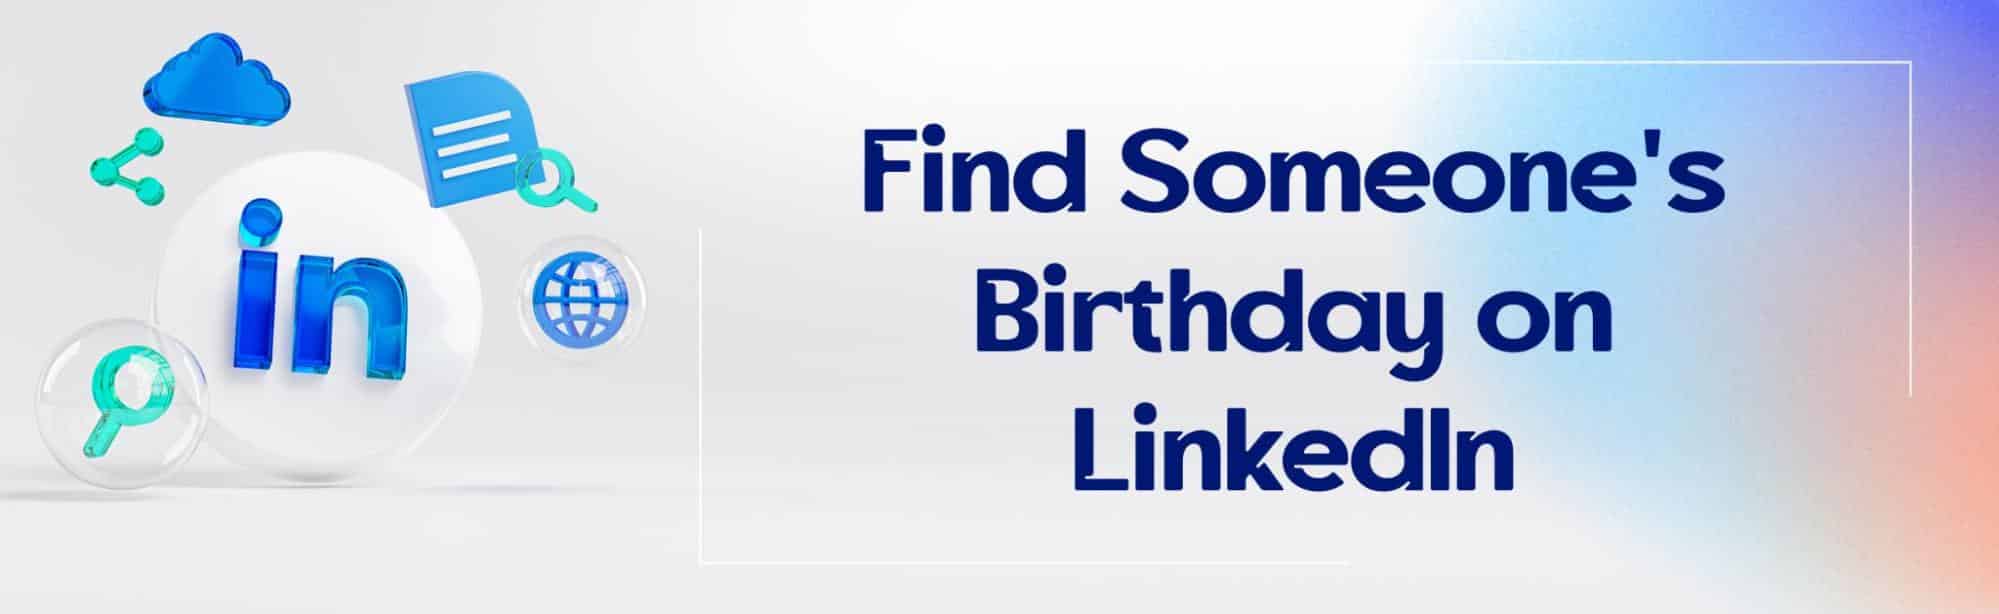 How to Find Someones Birthday on LinkedIn?